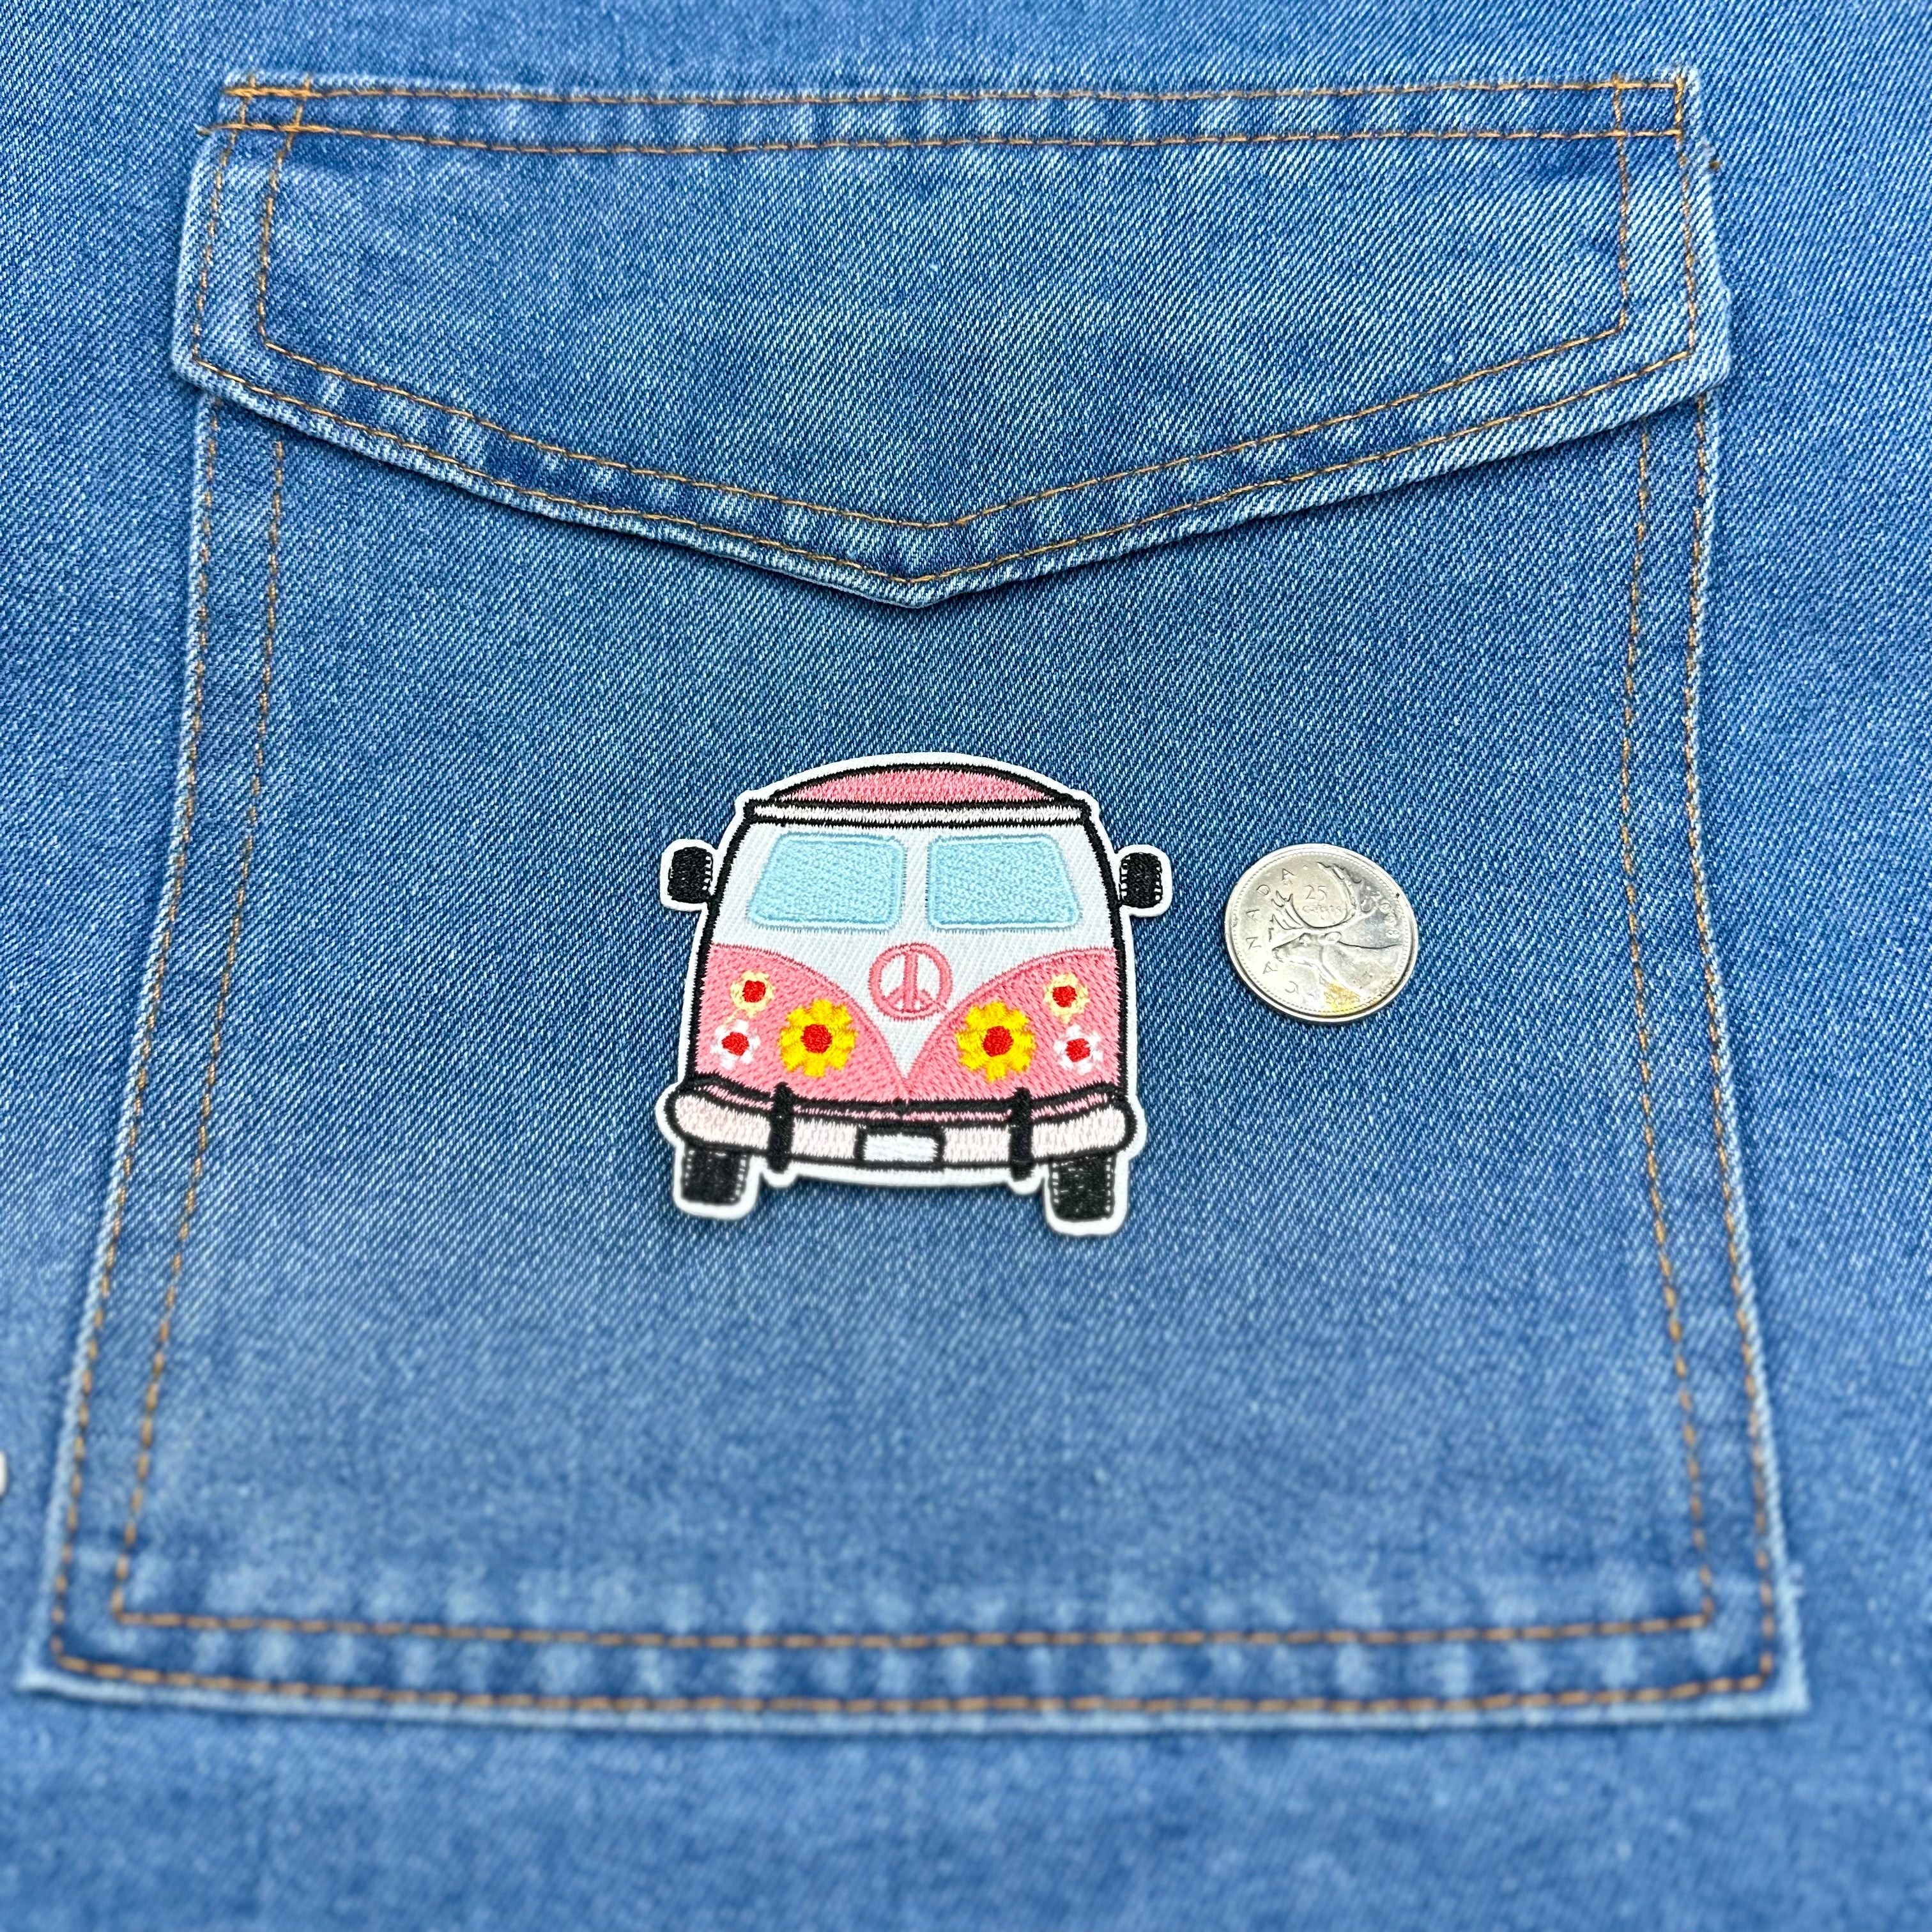 Iron On Patches - VW Van/Bus Pink